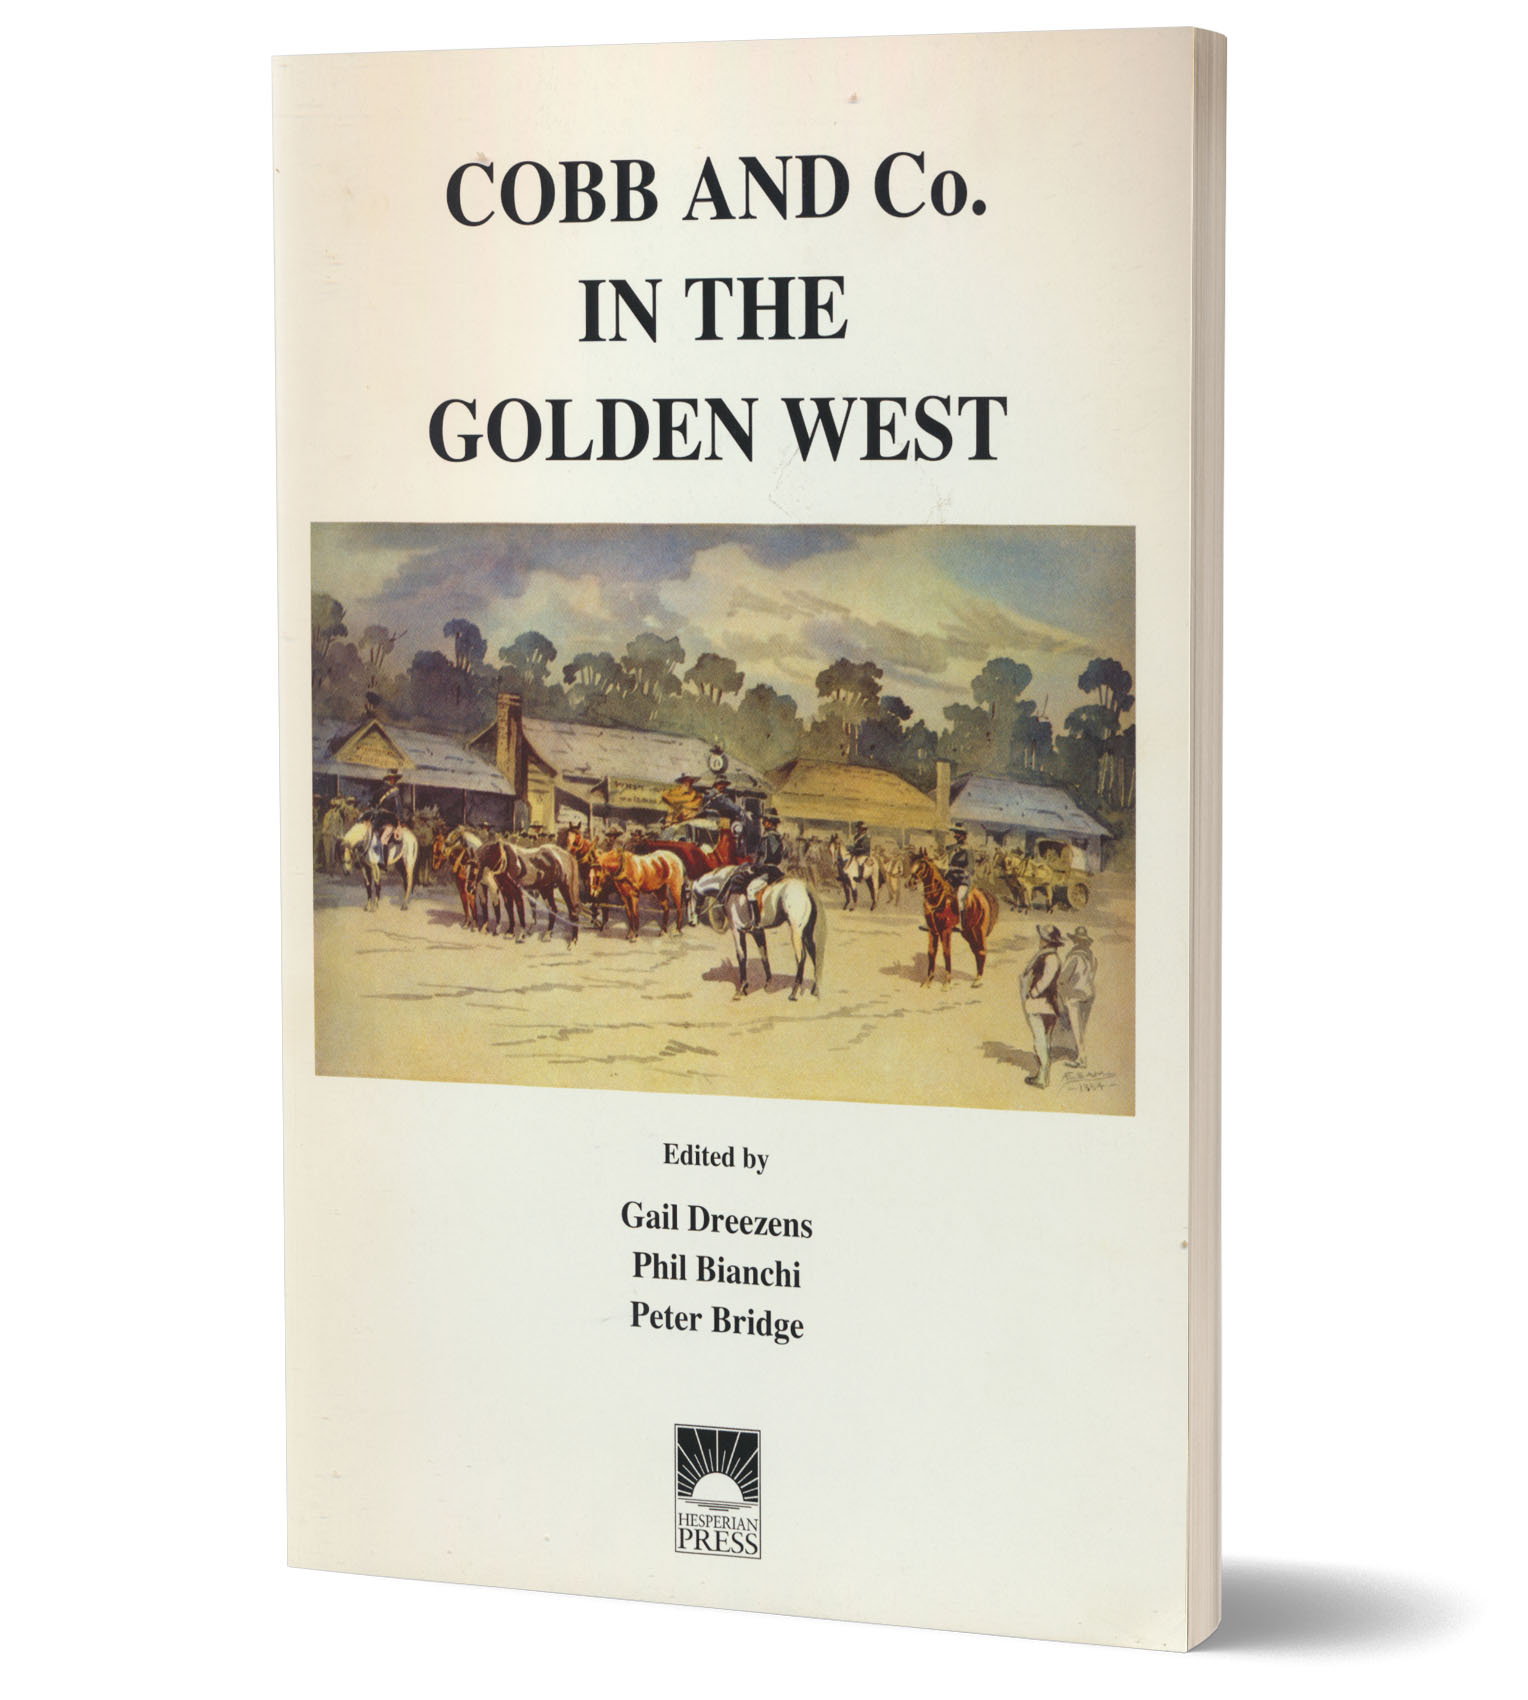 Cobb and Co. in the Golden West